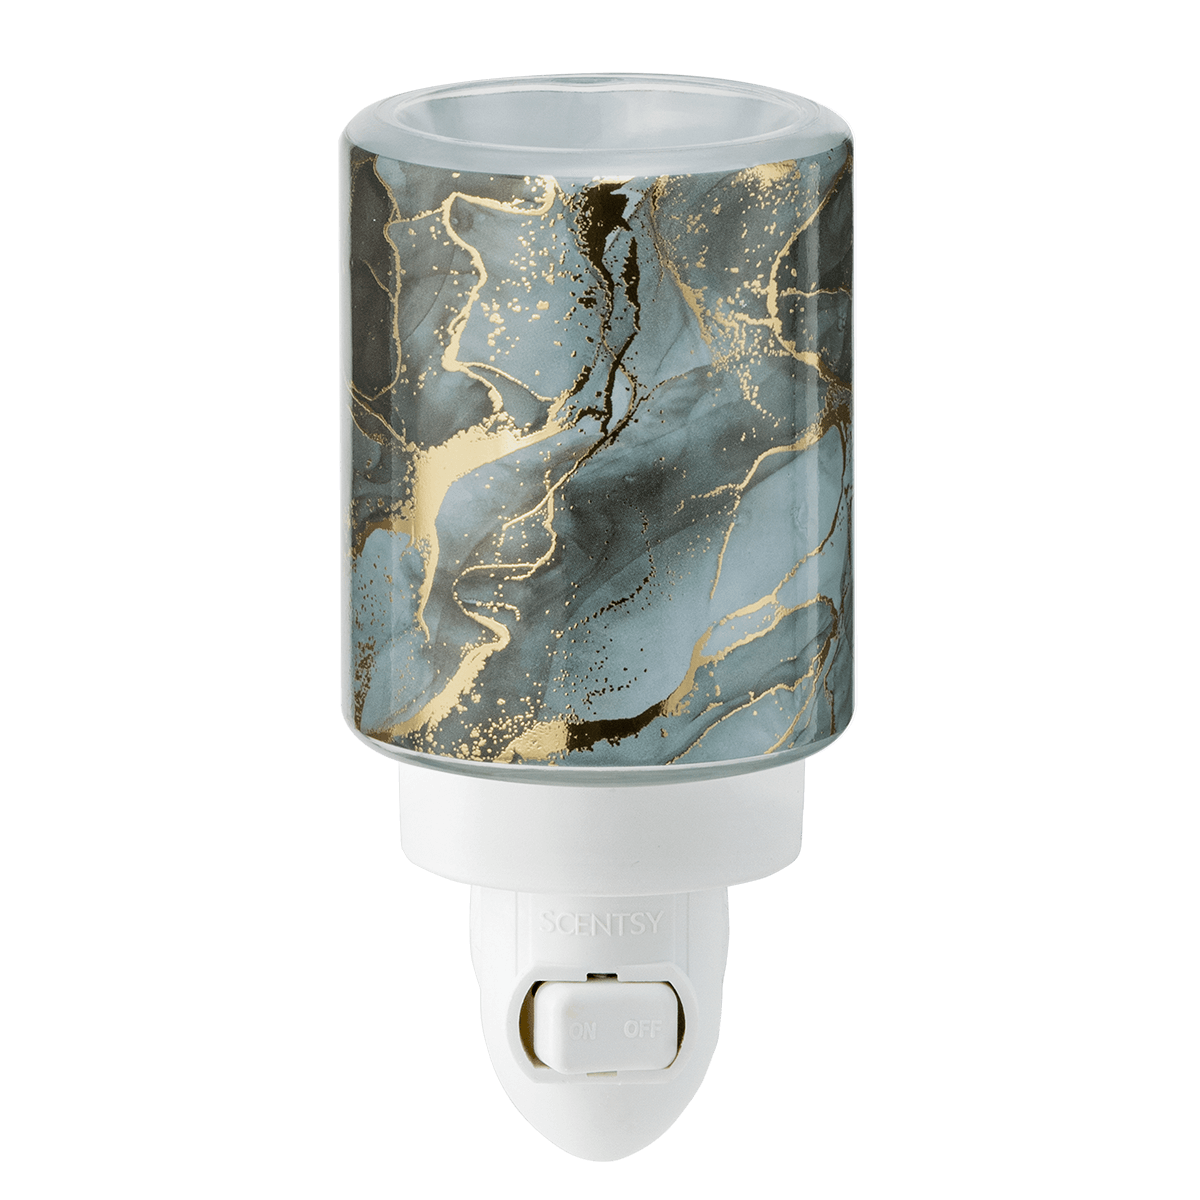 Gold Cracked Marble Scentsy Plug in Warmer